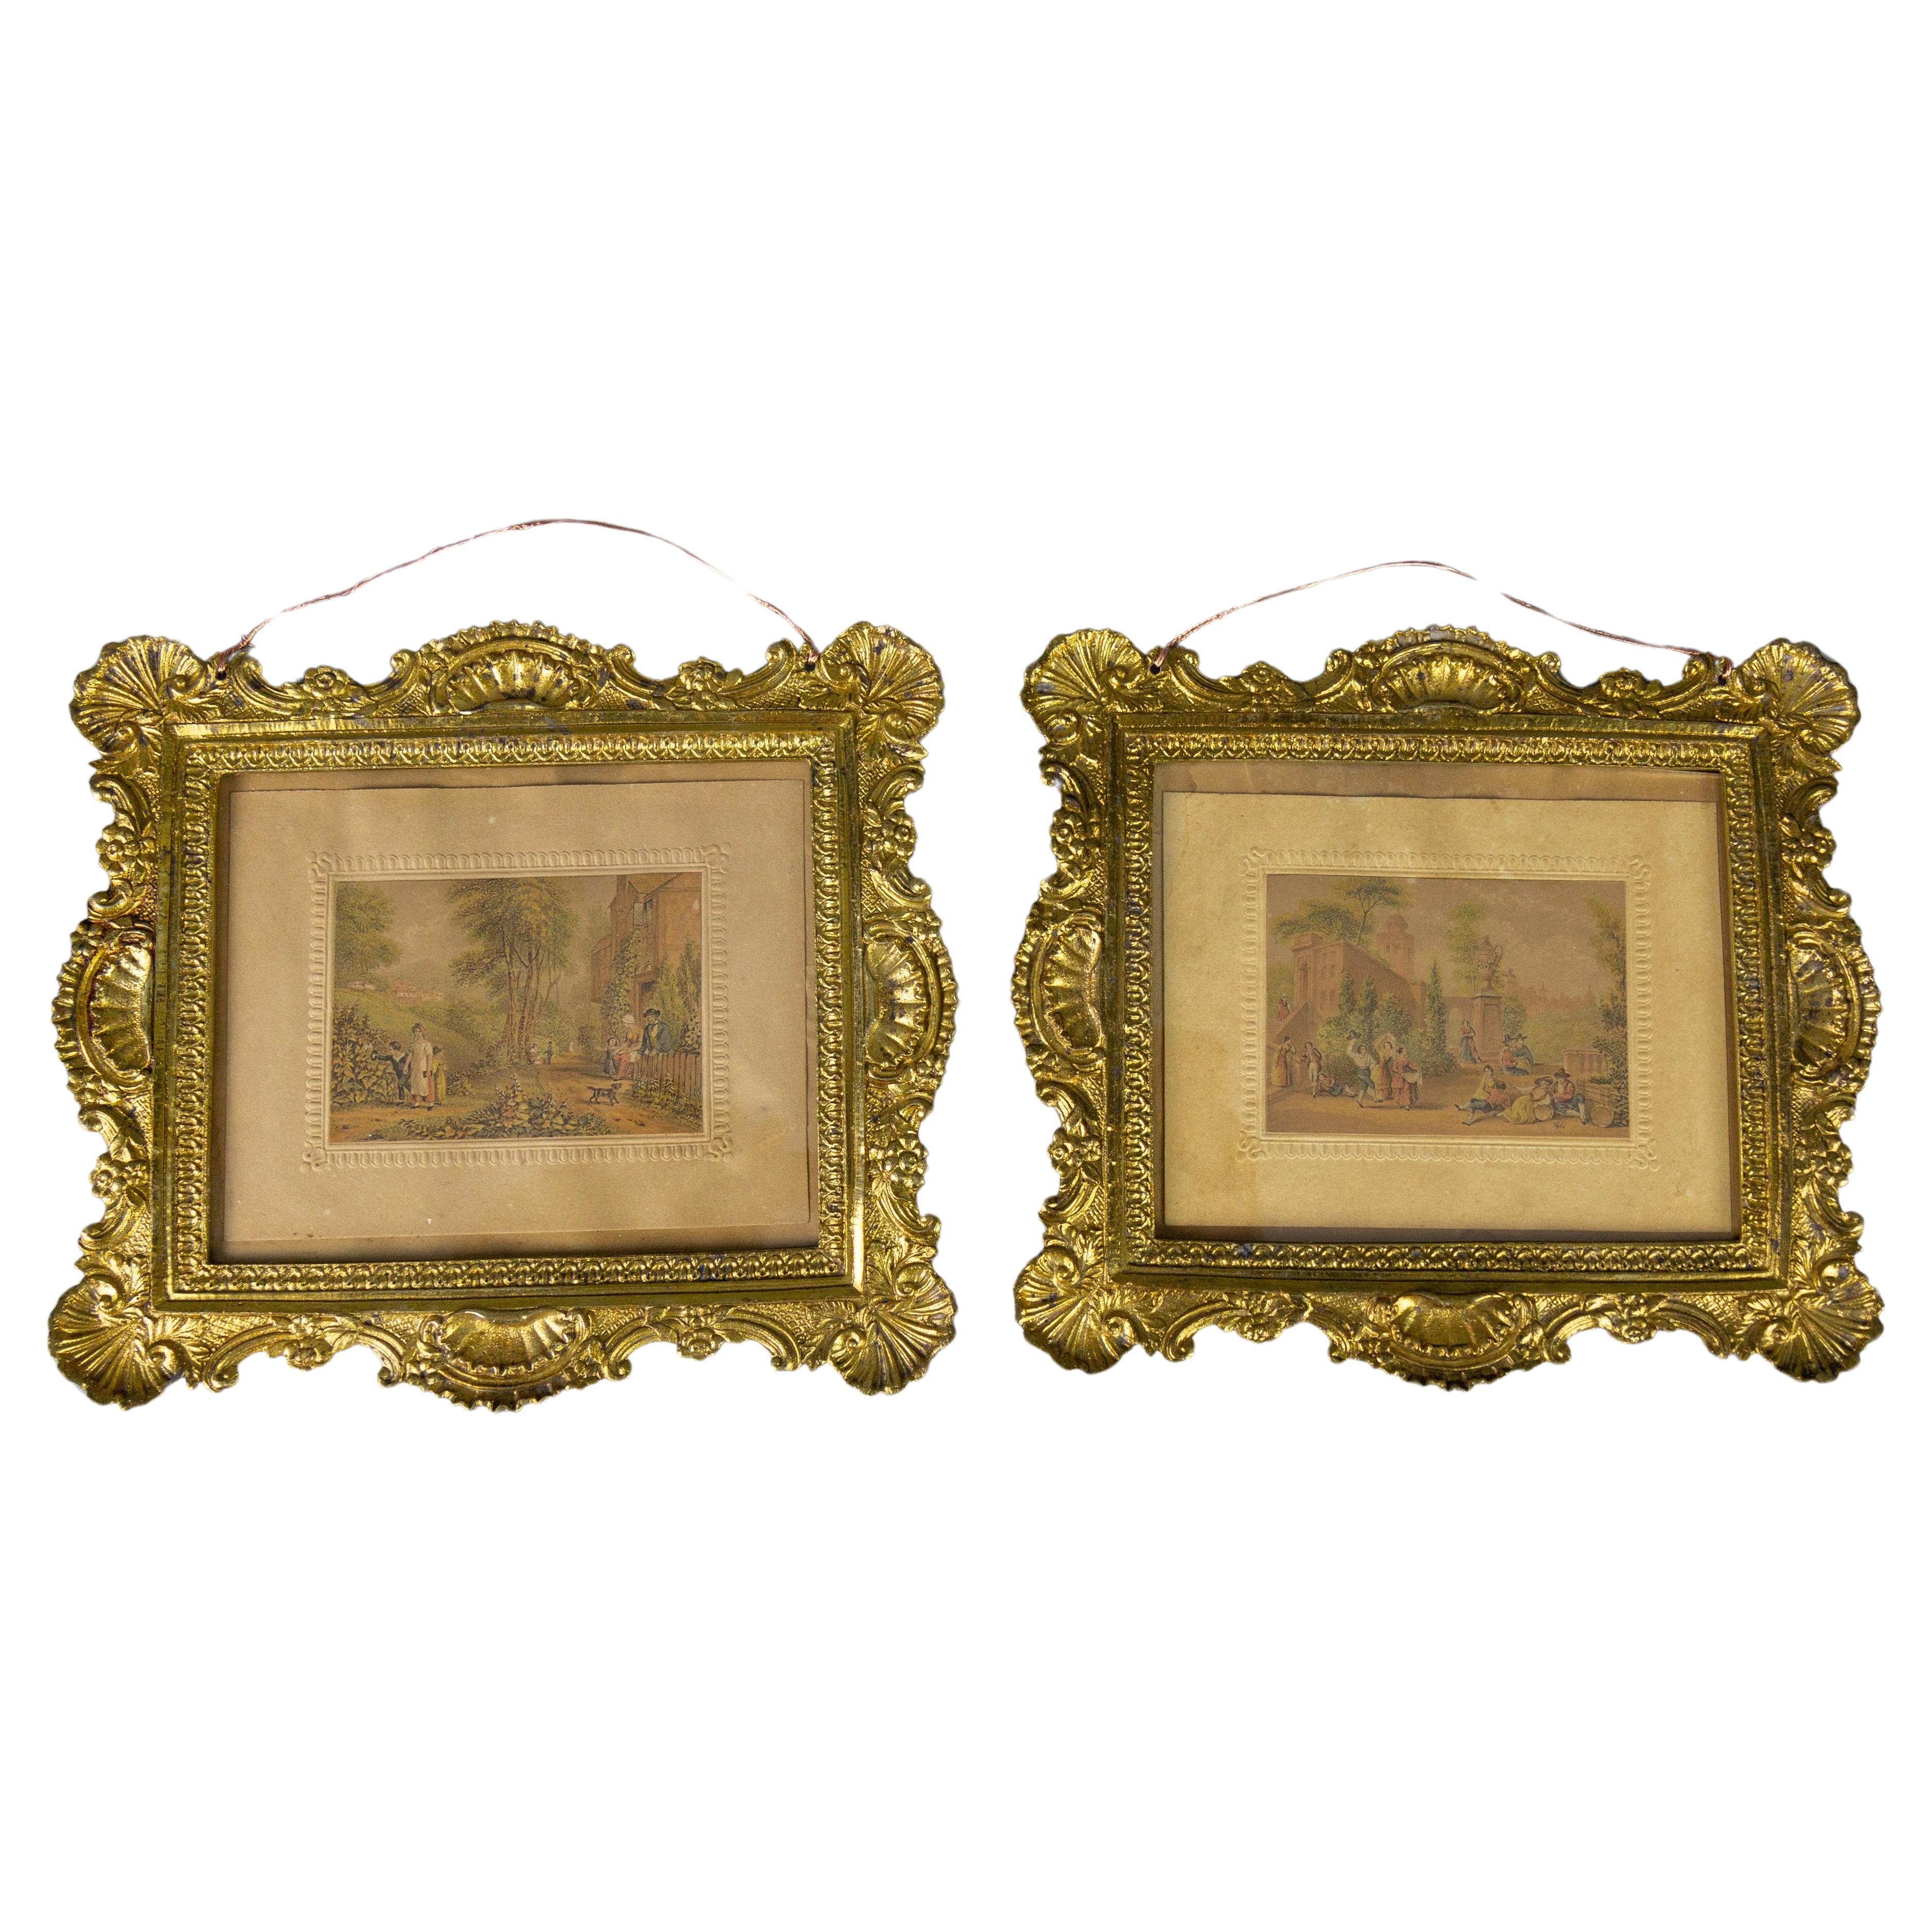 Pair of Antique French Gilt Bronze Rococo Style Picture Frames, ca. 1890